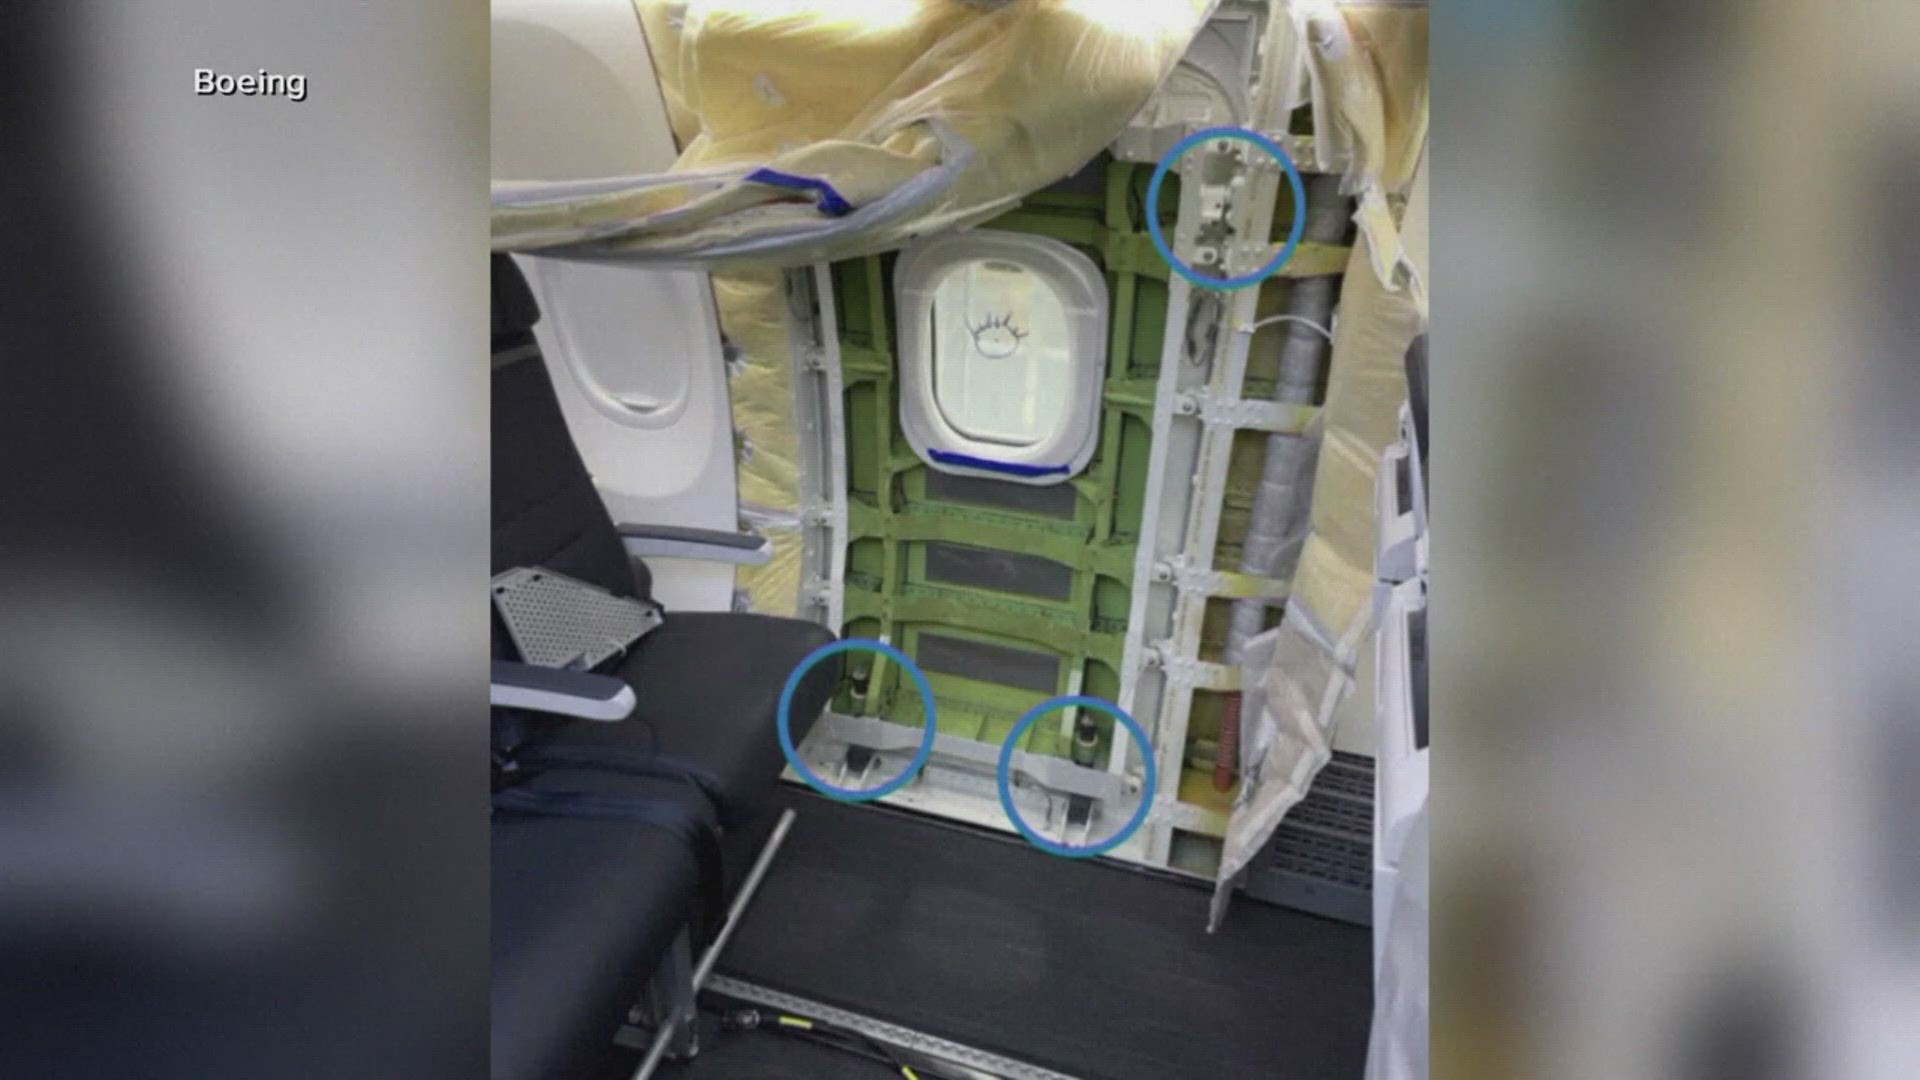 The NTSV says Boeing is not fully cooperating with their investigation into the Alaska Airlines flight where a door plug flew off mid-flight.